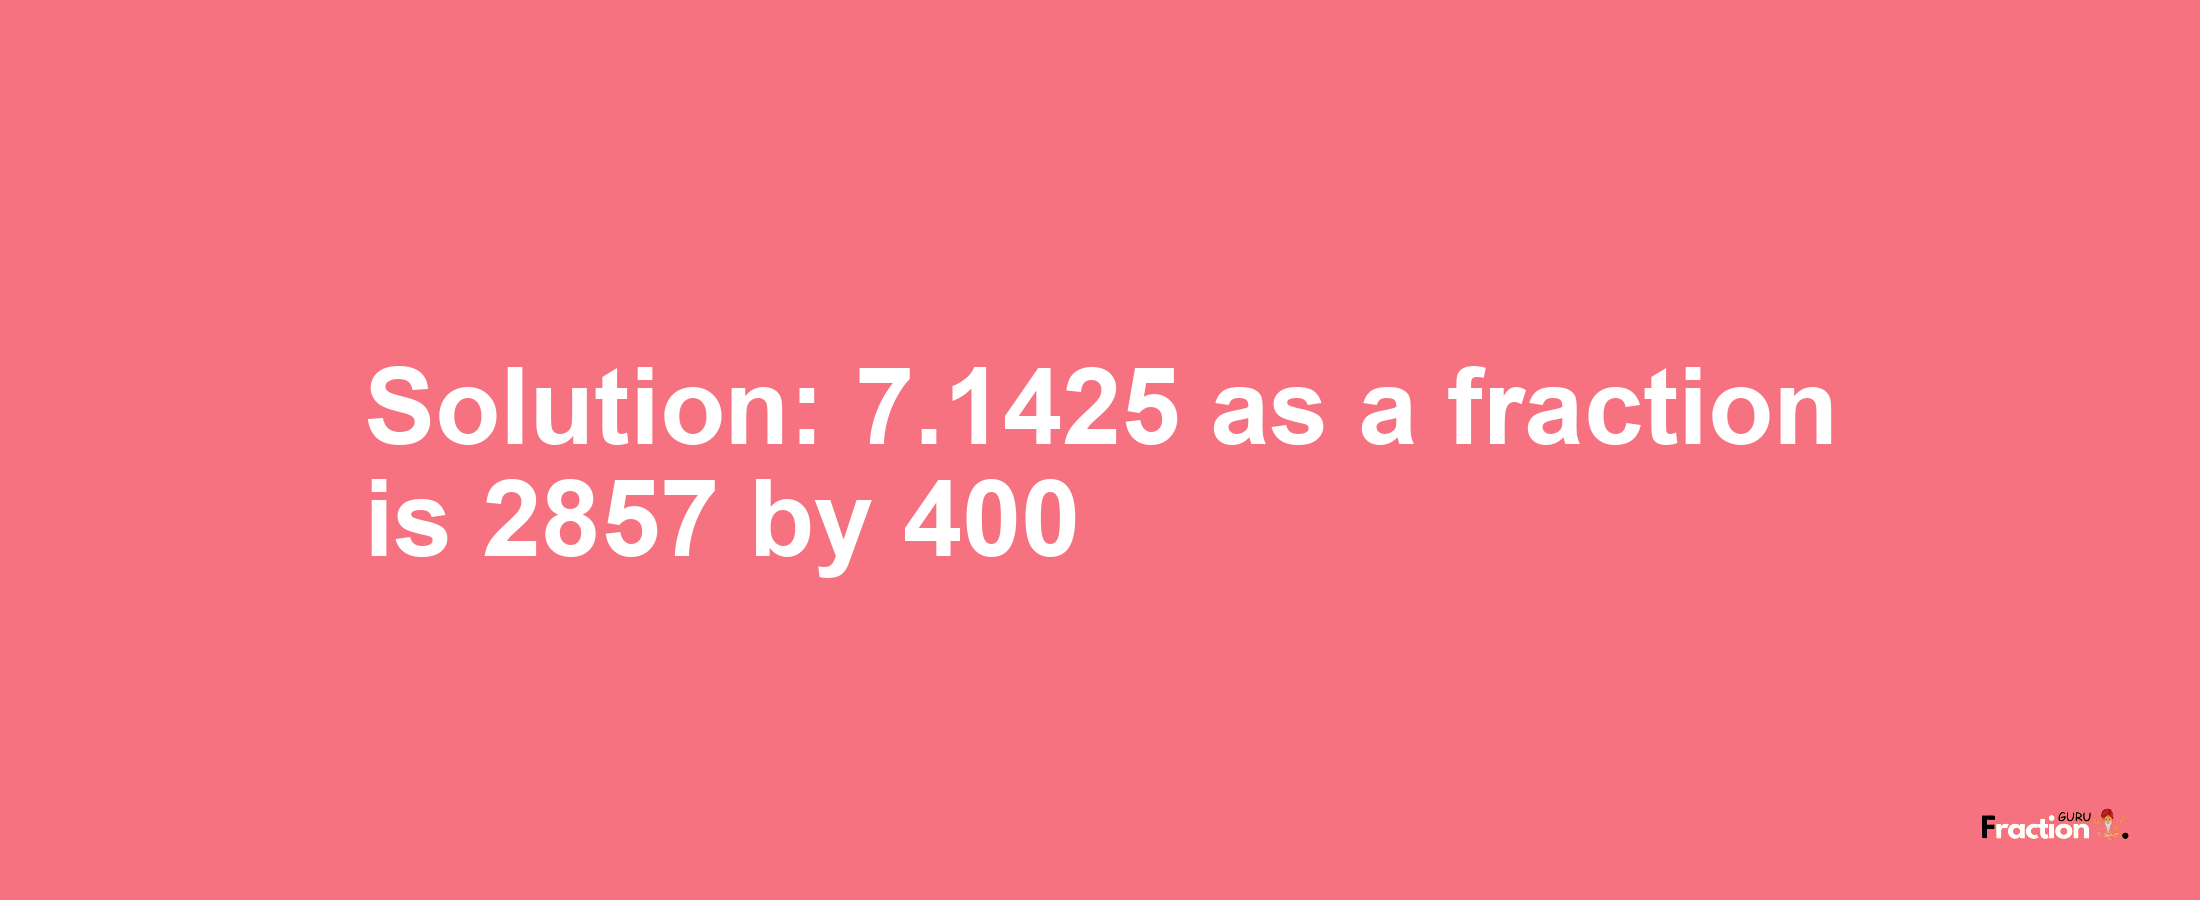 Solution:7.1425 as a fraction is 2857/400